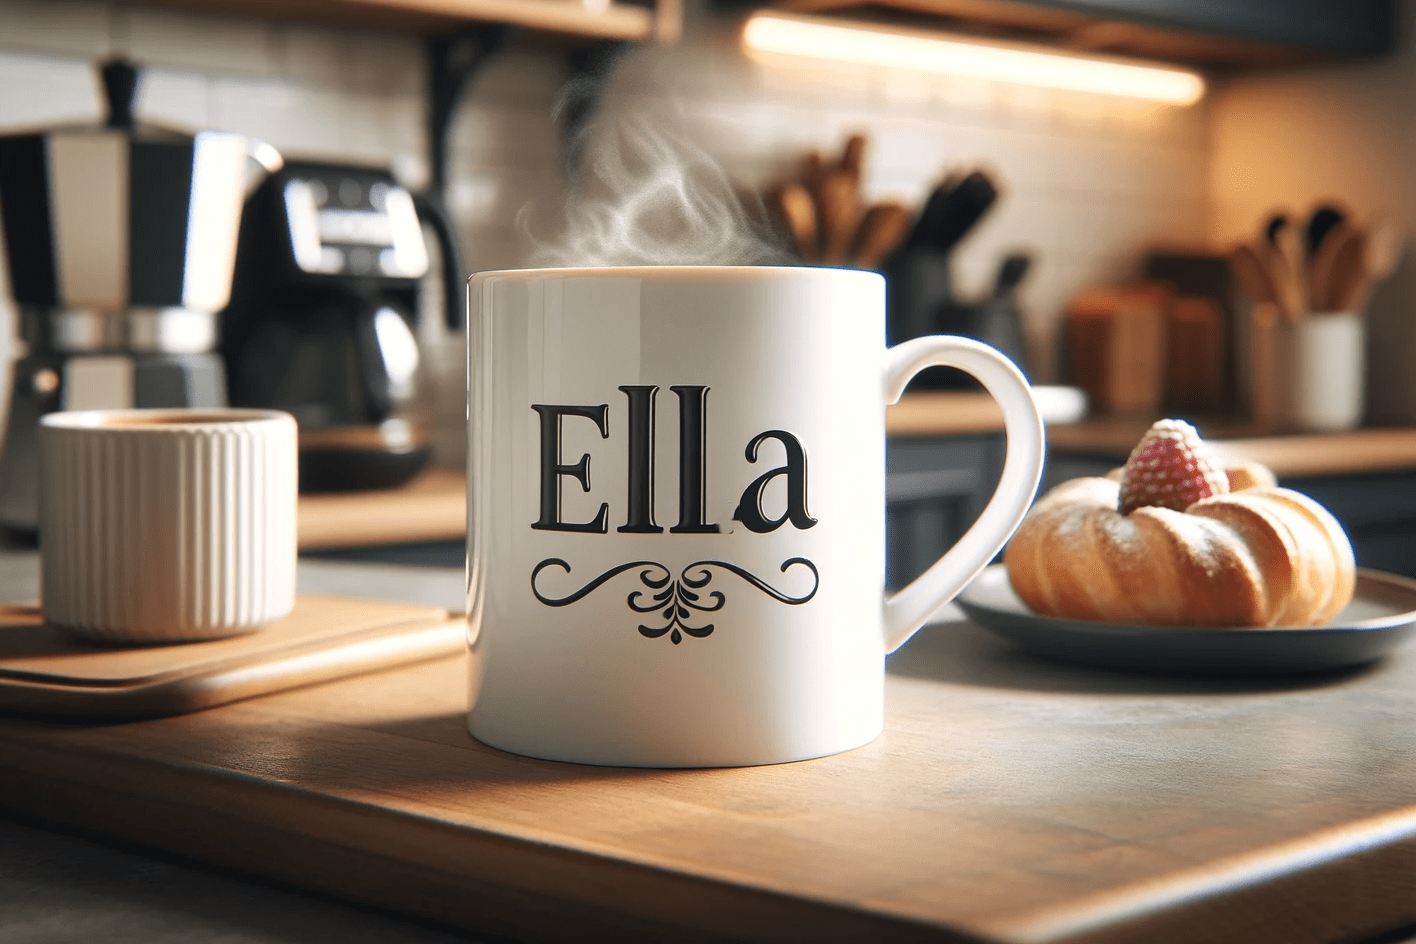 coffee mug on a kitchen counter with the four letter nickname Ella printed in stylish font. The mug is filled with stea